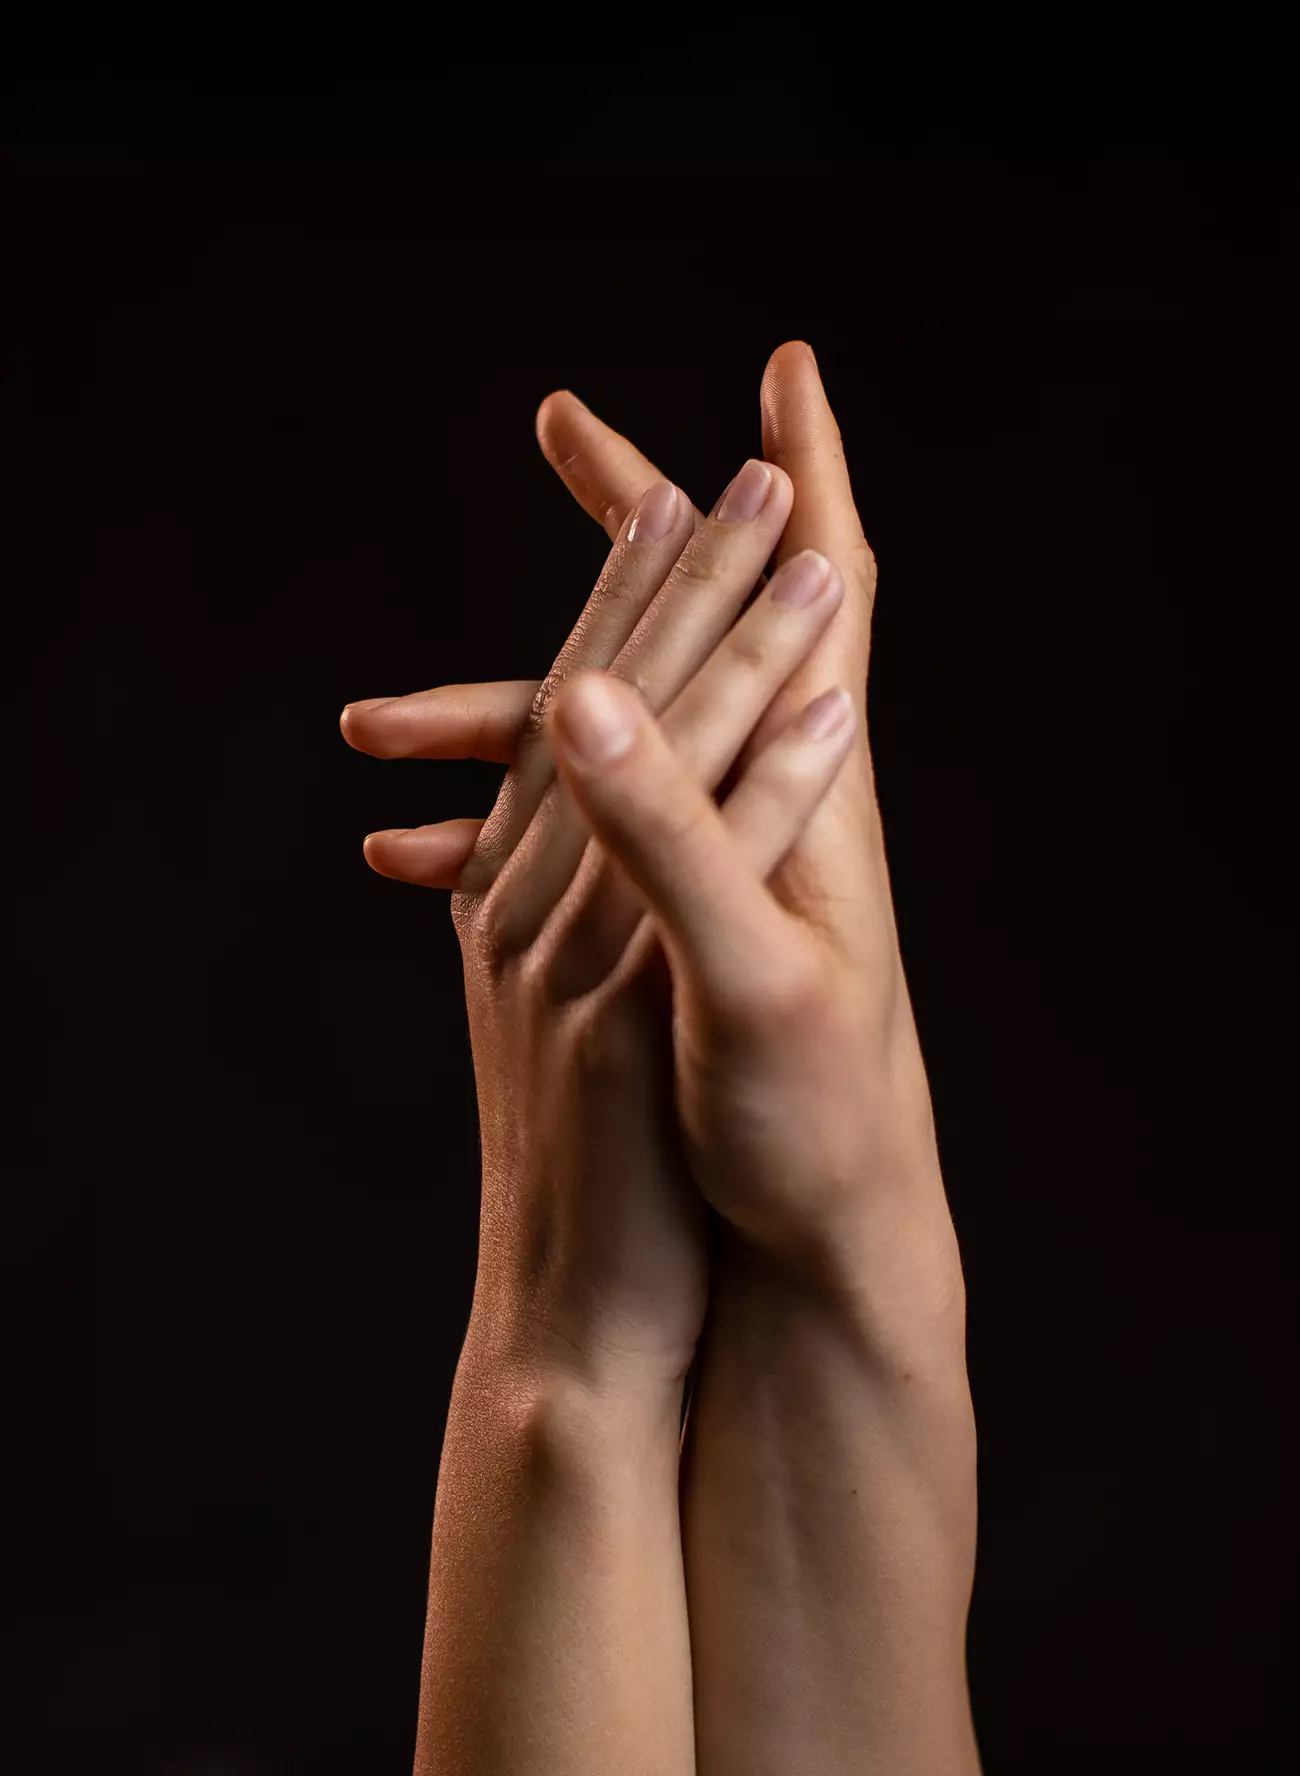 Female hands clasping together